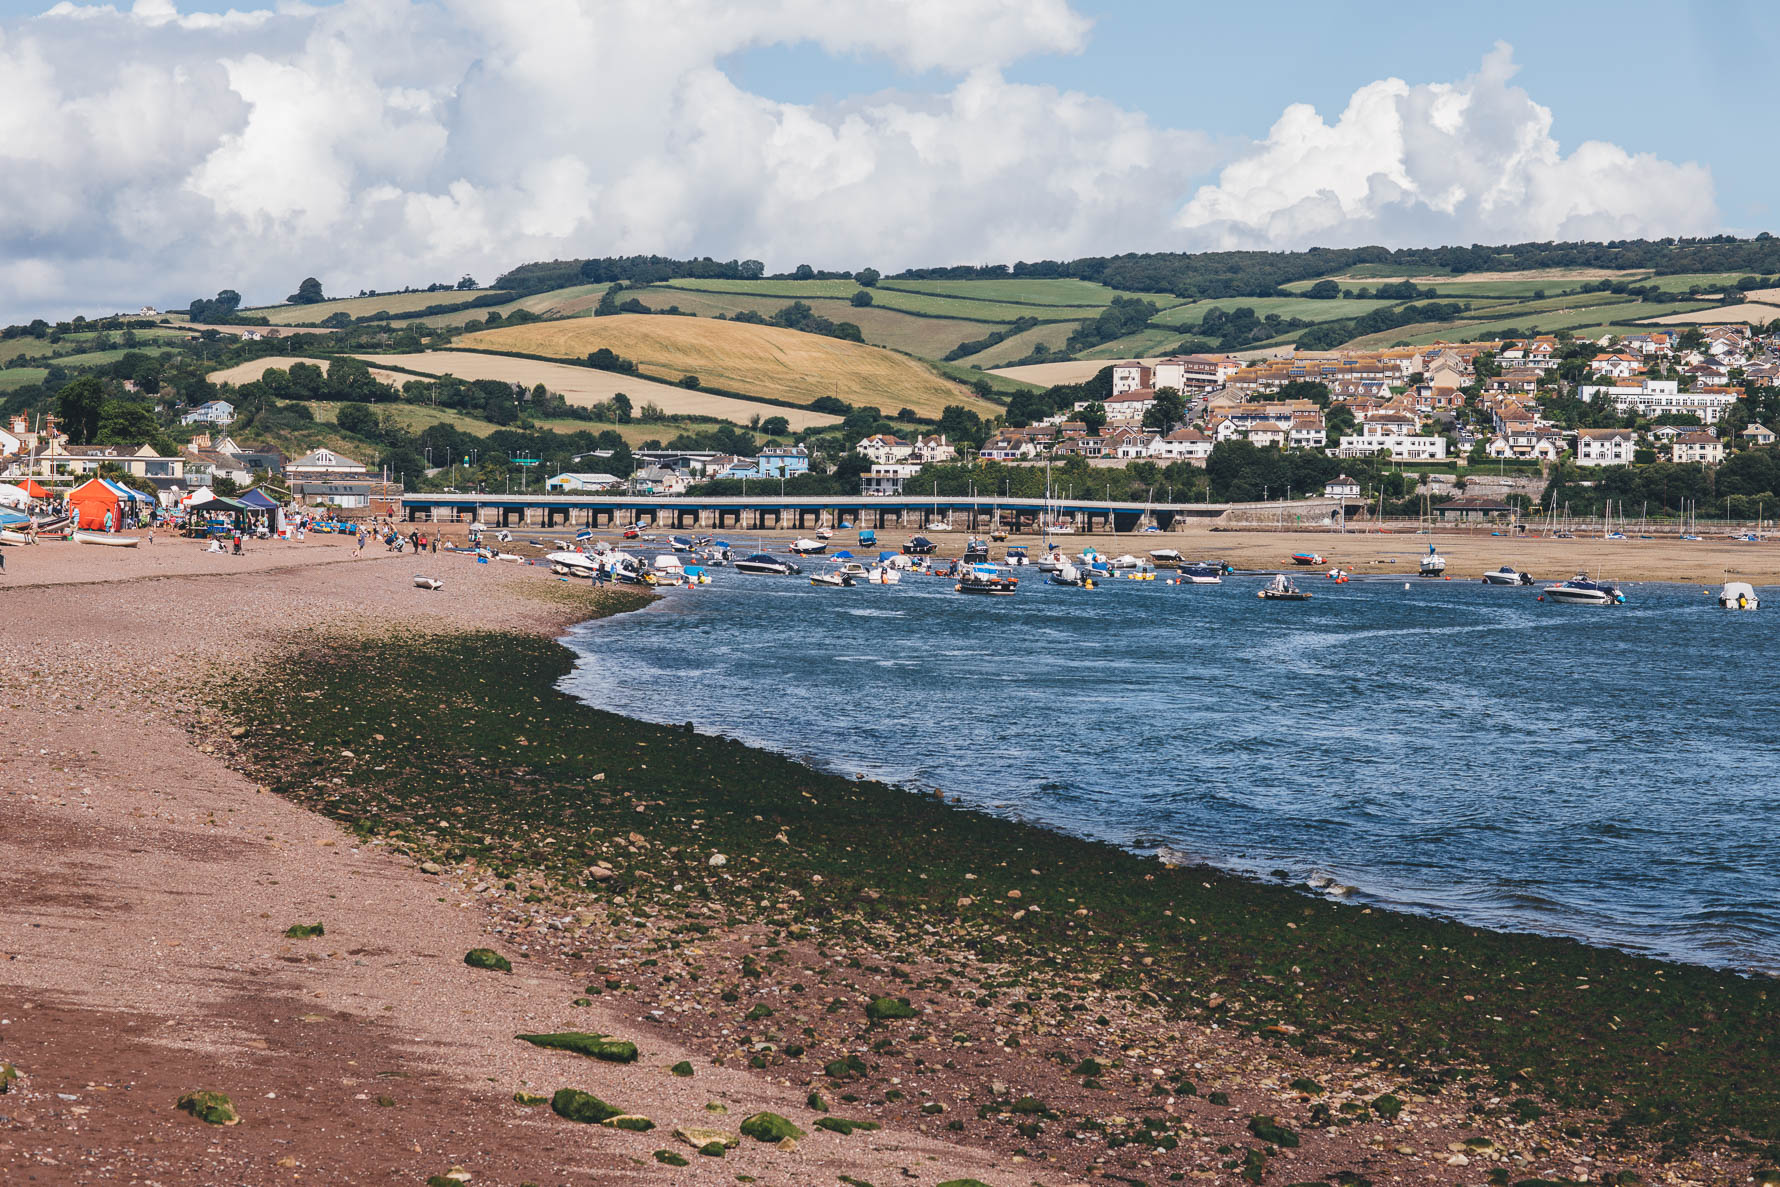 A scene of a beach and a harbour in Devon with houses and a patchwork of fields in the background below a blue sky filled with white clouds. There are lots of boats in the harbour